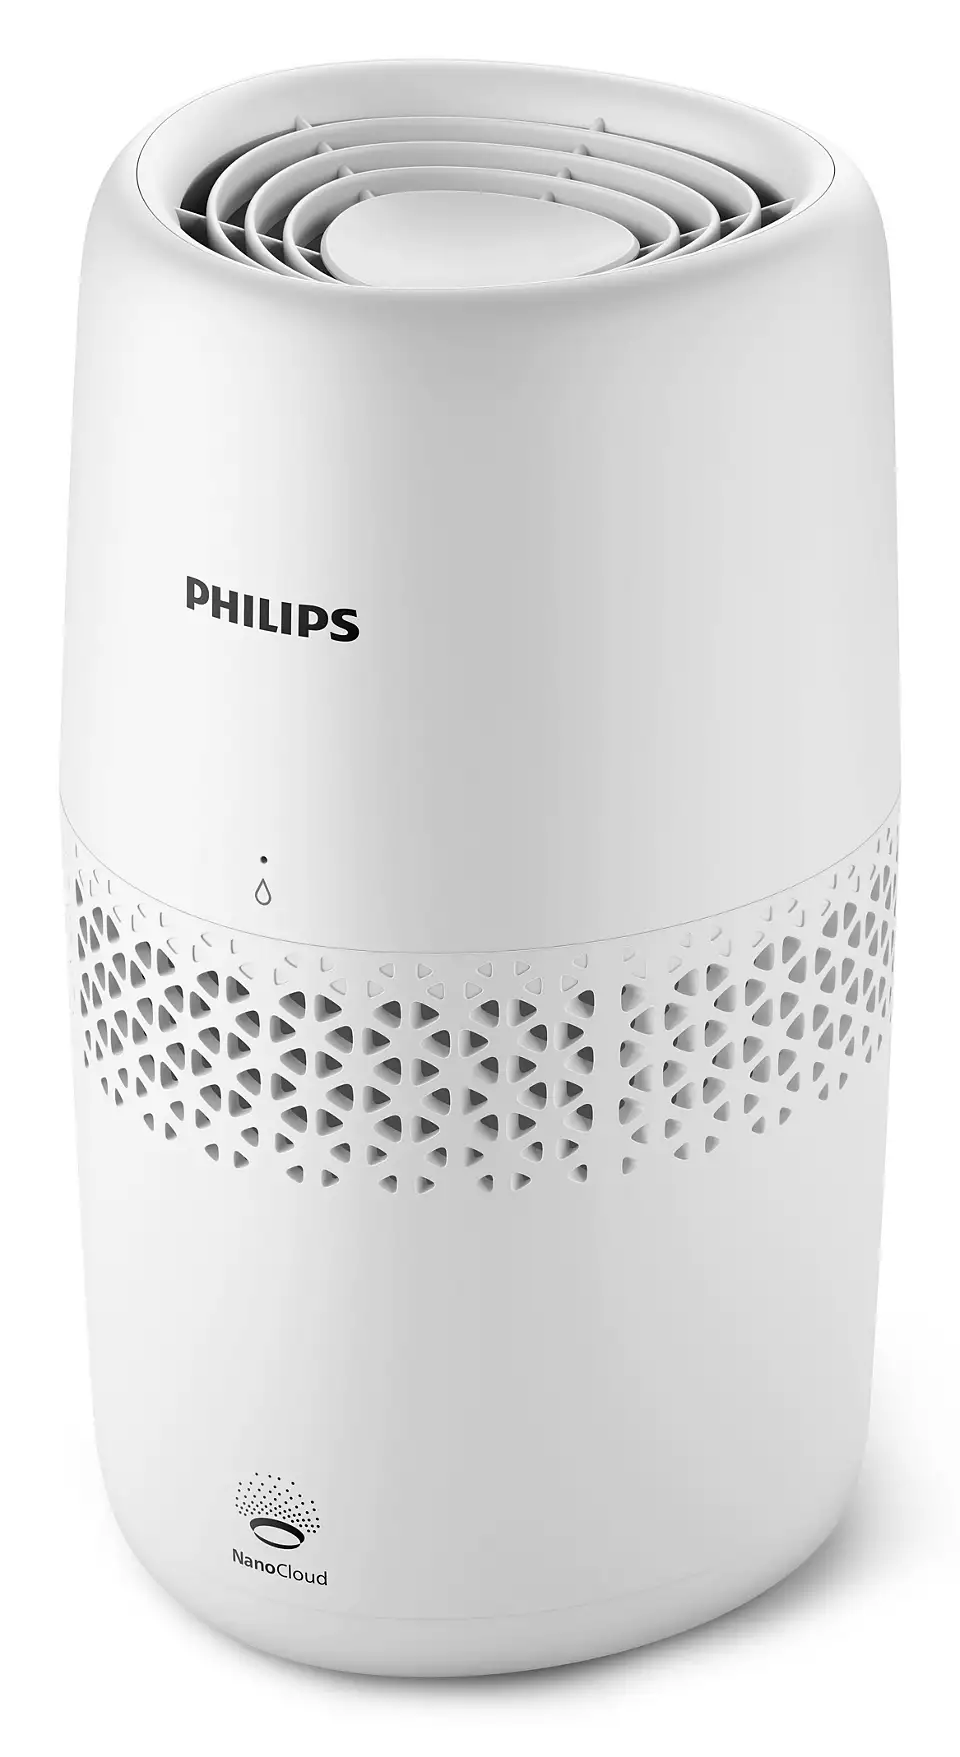 Philips Air Humidifier HU2510/10	 11 W, Water tank capacity 2 L, Suitable for rooms up to 31 m², NanoCloud technology, Humidification capacity 190 ml/hr,  White